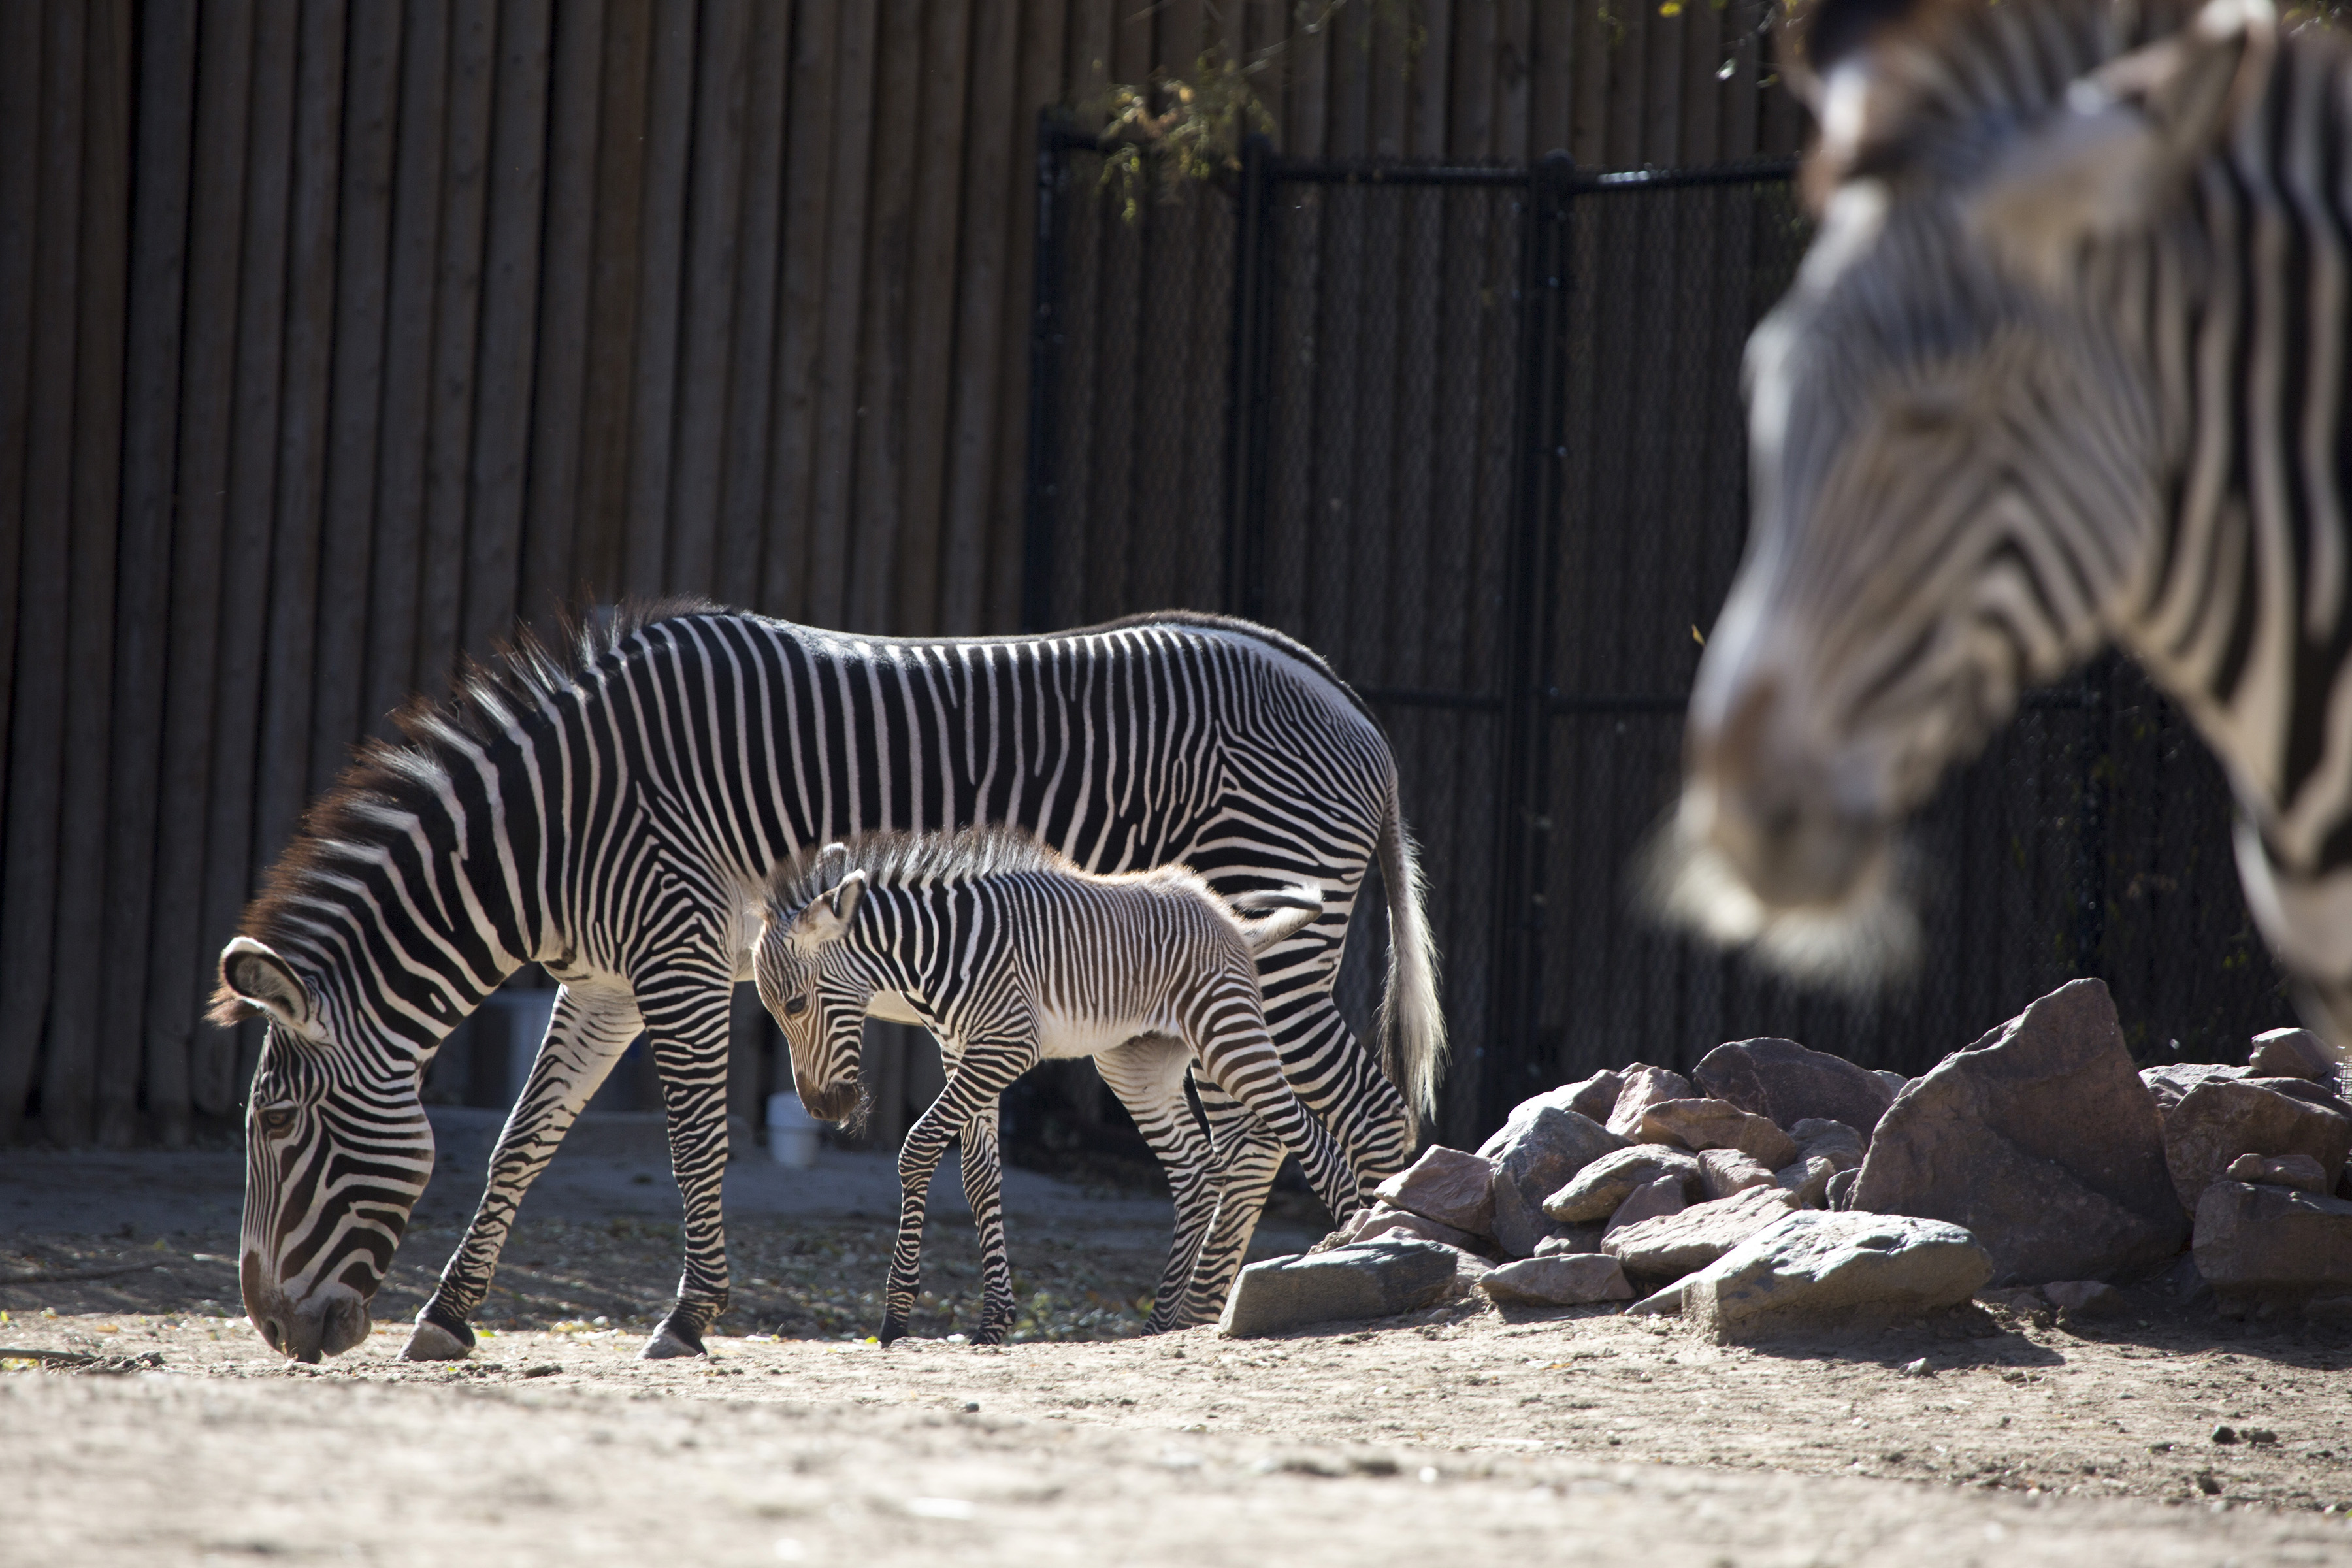 Cody, a male Grevy’s zebra was born Dec. 3 at the Denver Zoo. Cody’s mother, a 16-year-old named Farasi, had another male foal in October 2015, who will be Cody’s playmate. The population of Grevy’s zebras in the wild is estimated at fewer than 2,000.